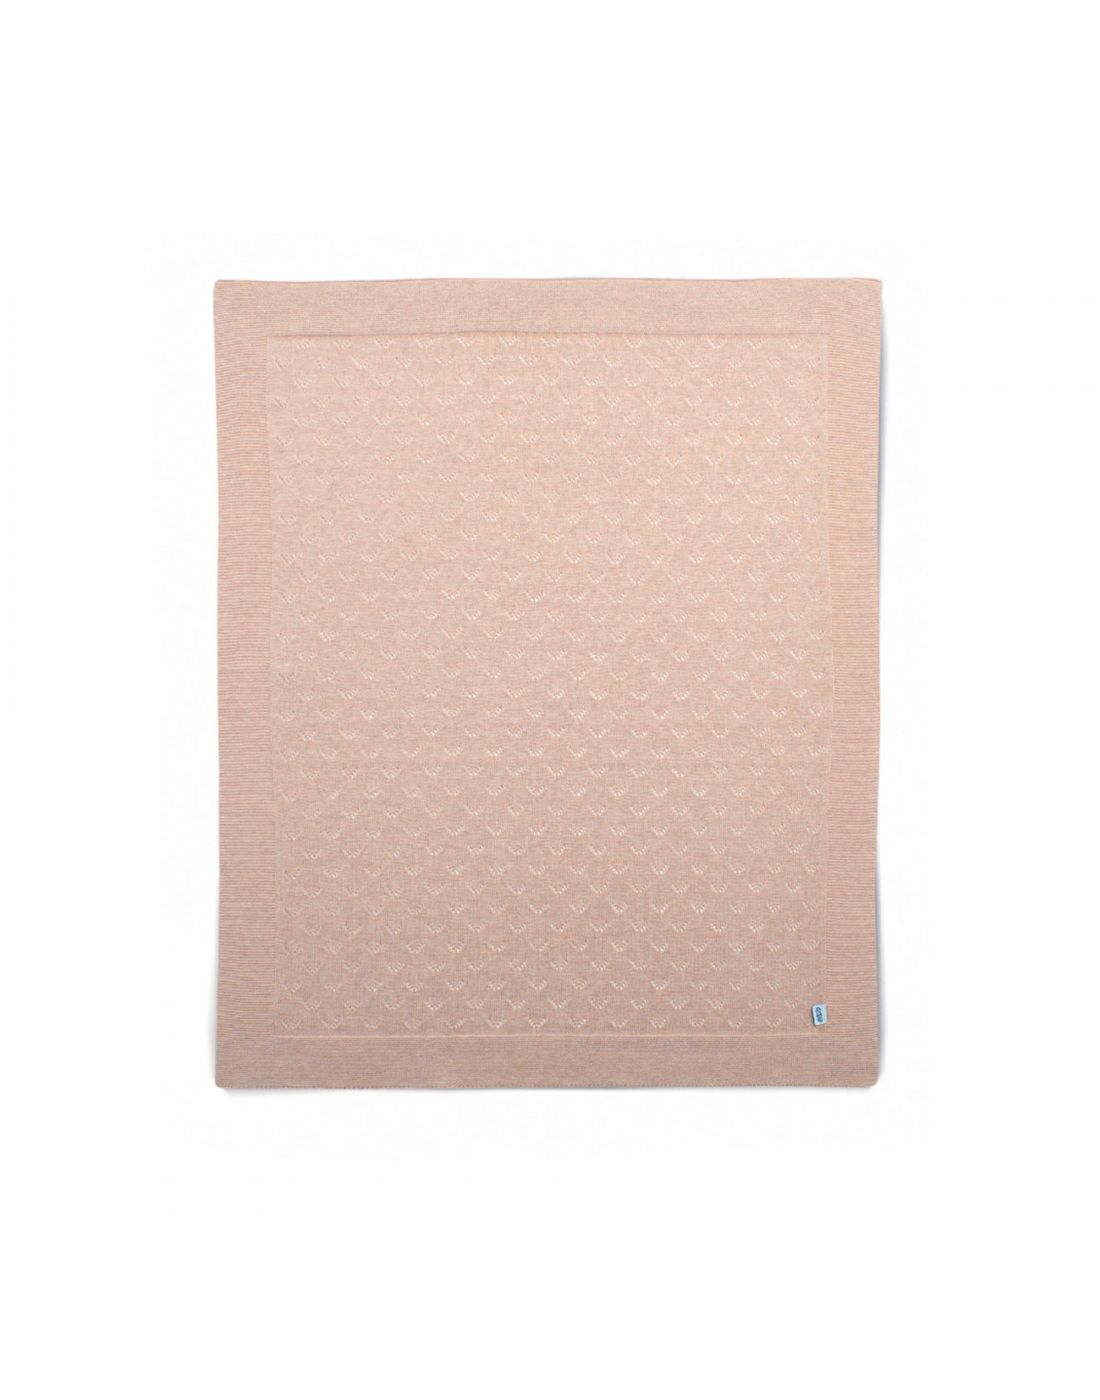 Mamas & Papas Knitted Blanket SML 70*90cm Pink Pointelle